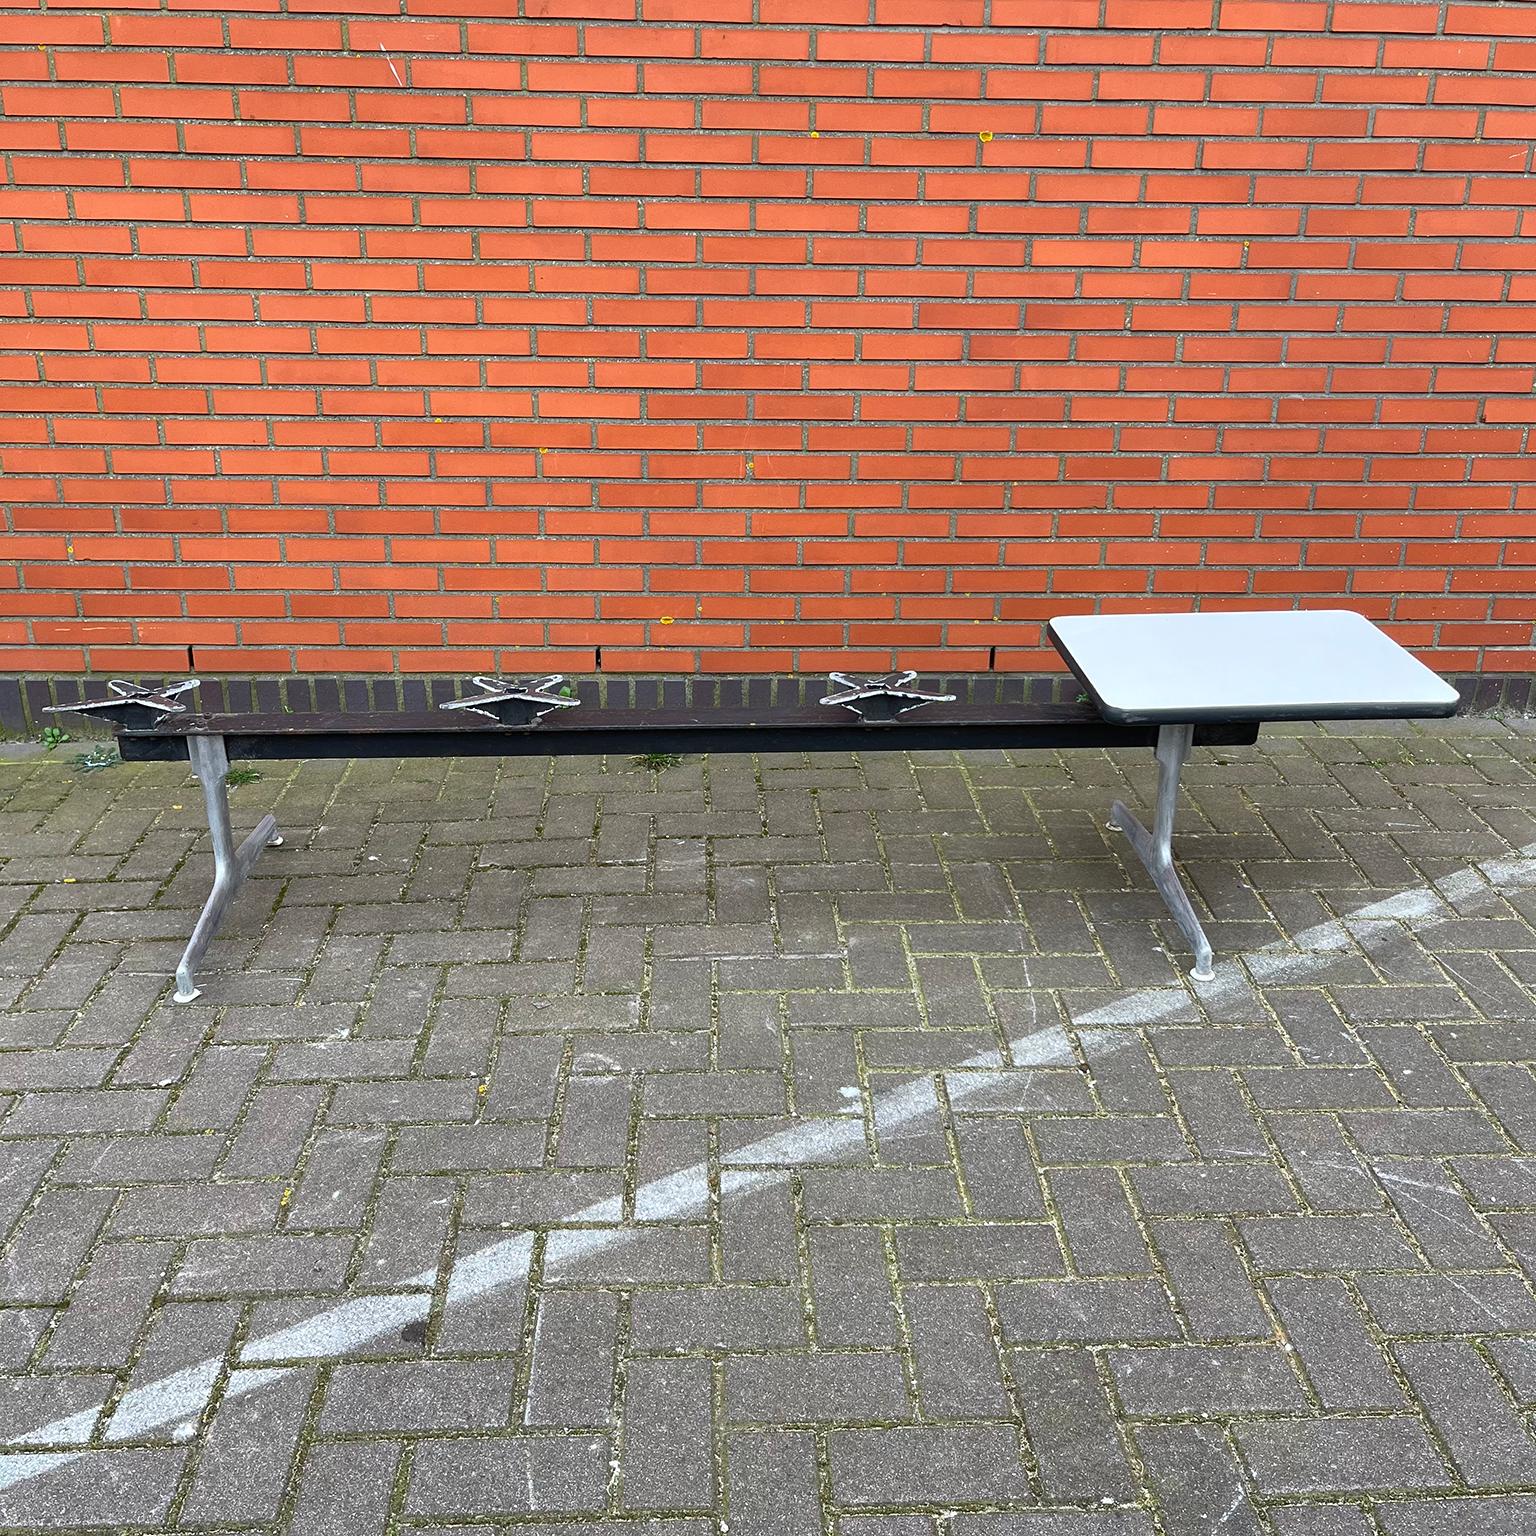 Tandem Base and Table without shells. Show signs of use.

35 cm H incl the height of the bar of the base/ 40 incl the top of the seat support/ 42 cm  incl the top of the table top supporter x 182 cm L/ 190 cm incl the width with the table top